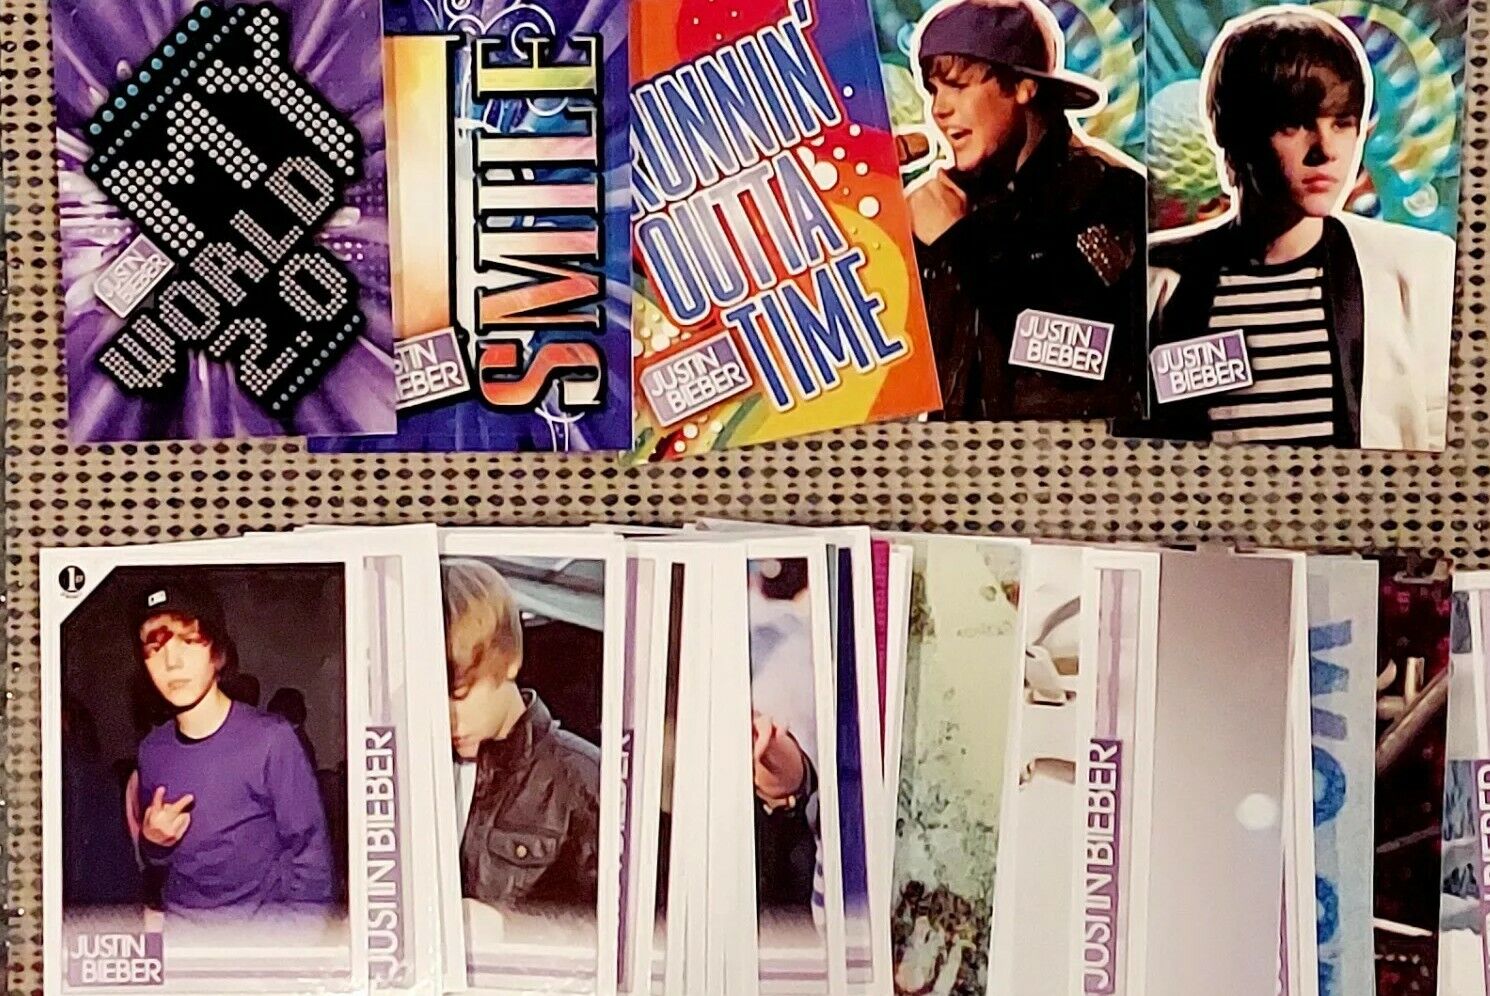 Justin Bieber 2010 Panini 1st Print (LOT OF 100 CARDS + 10 STICKERS) RARE ROOKIE